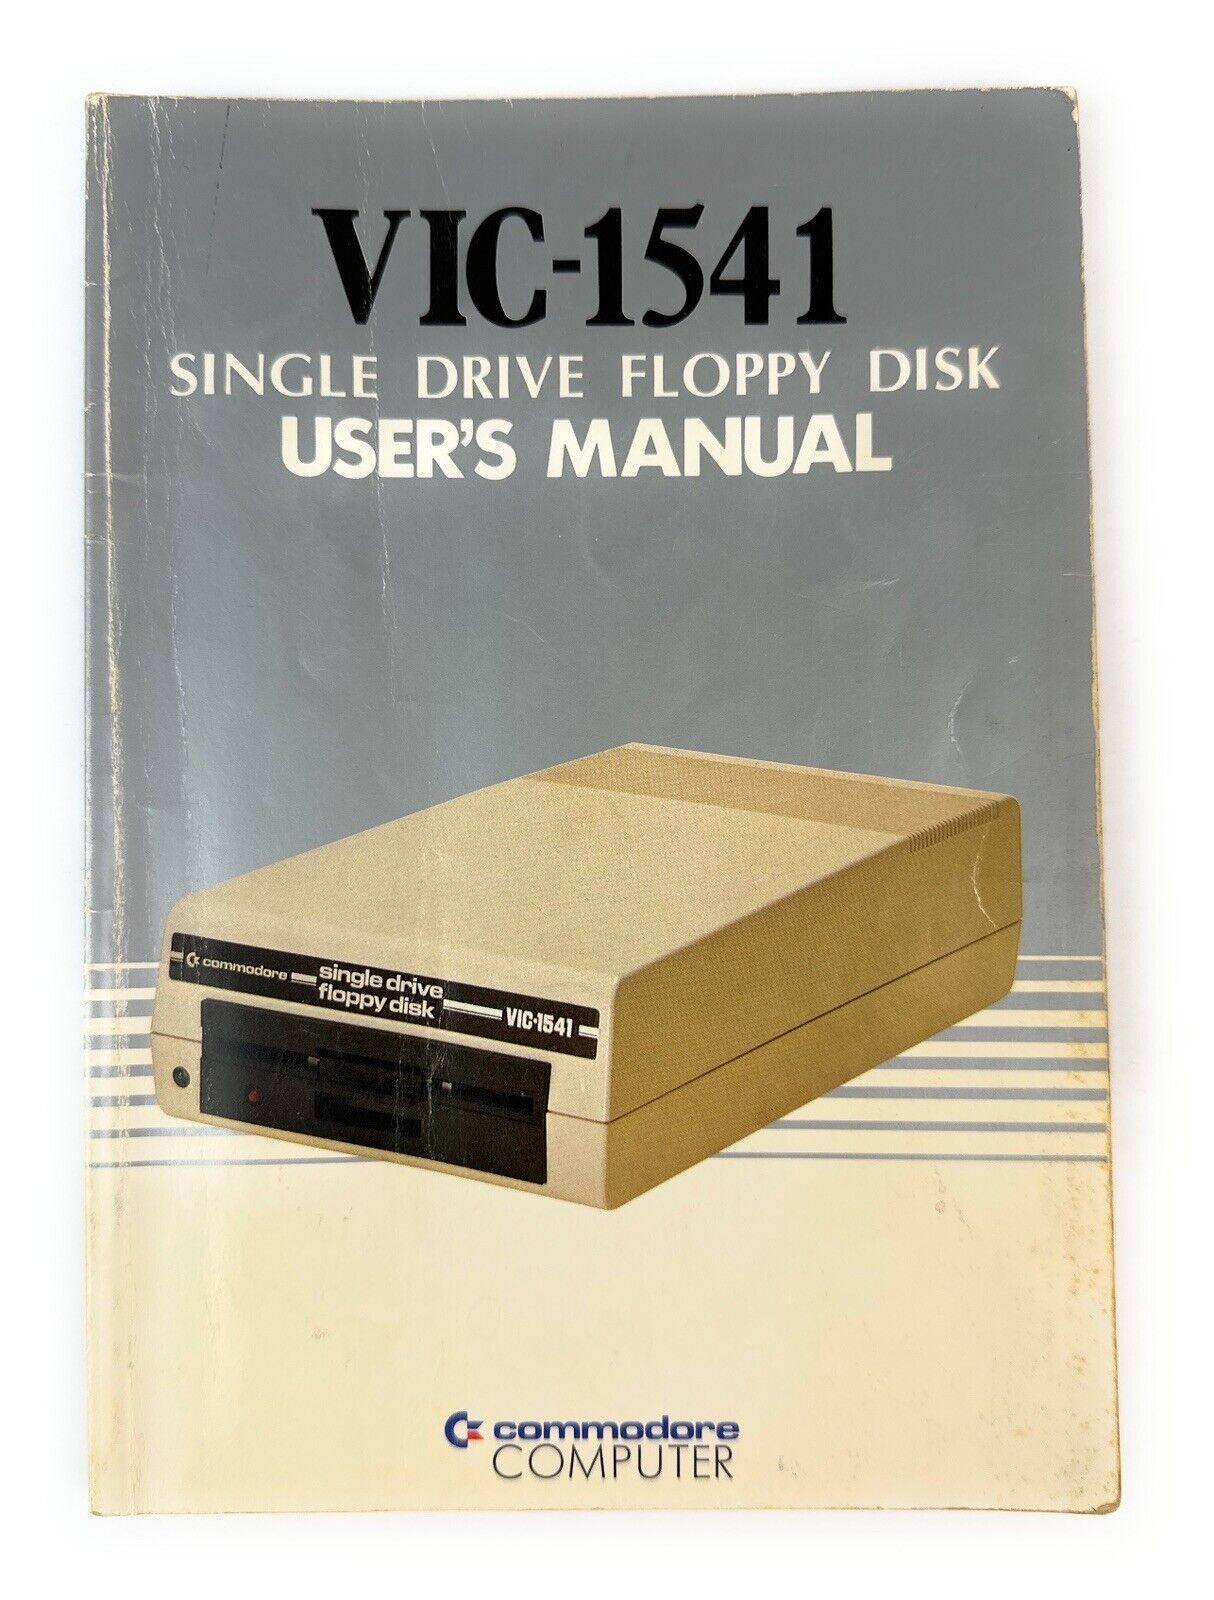 Commodore VIC-1541 Single Drive Floppy Disk User's Manual